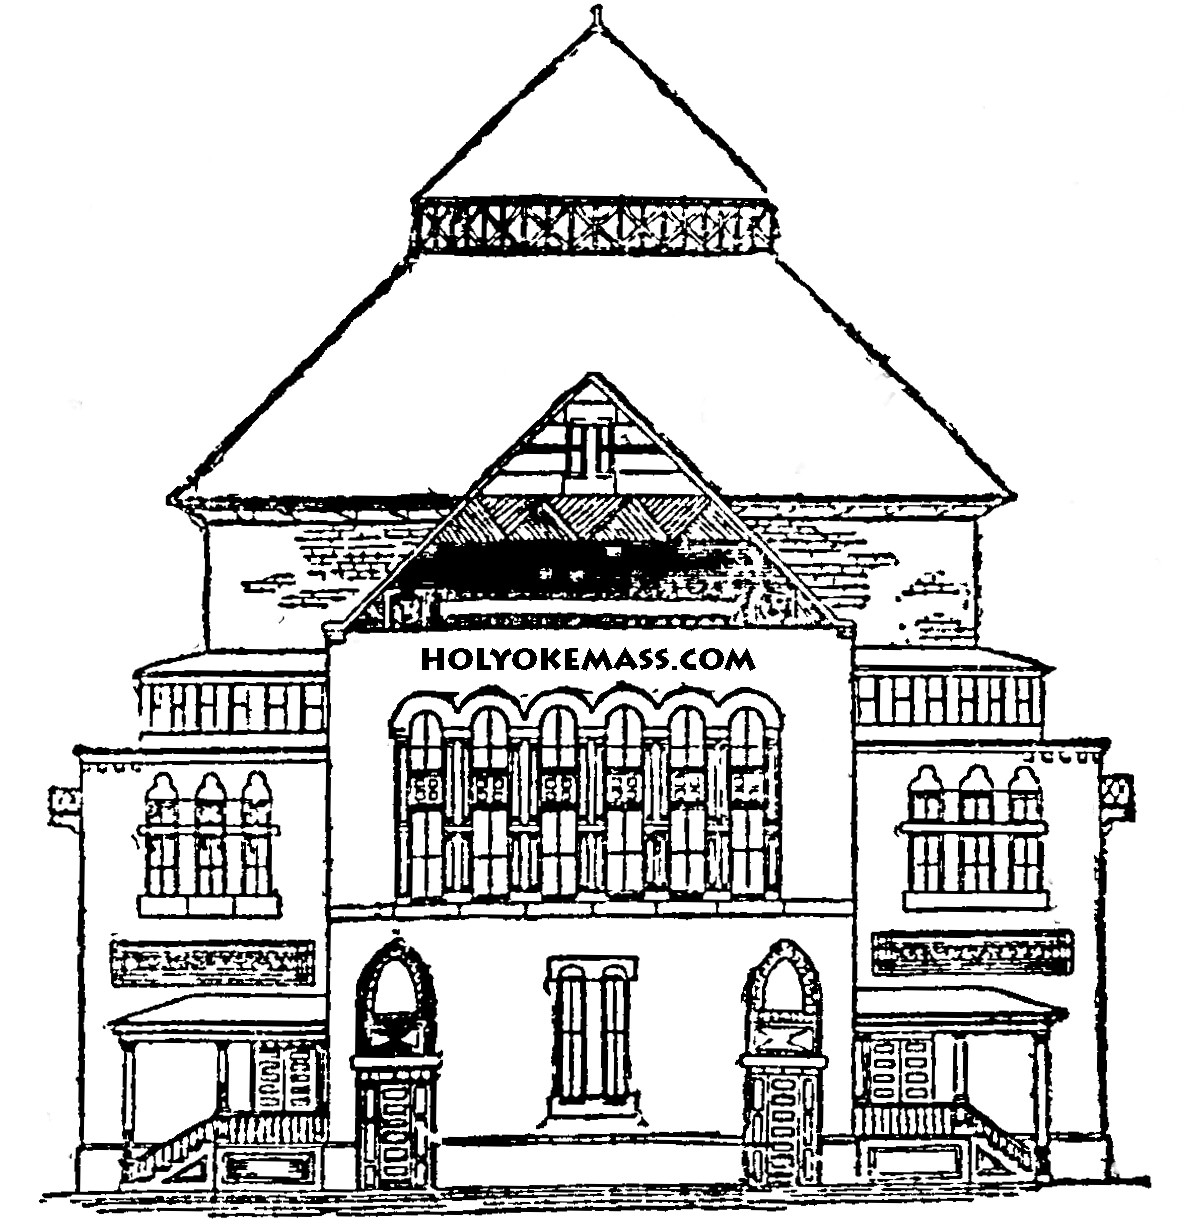 House Coloring Sheet
 Free Printable House Coloring Pages For Kids